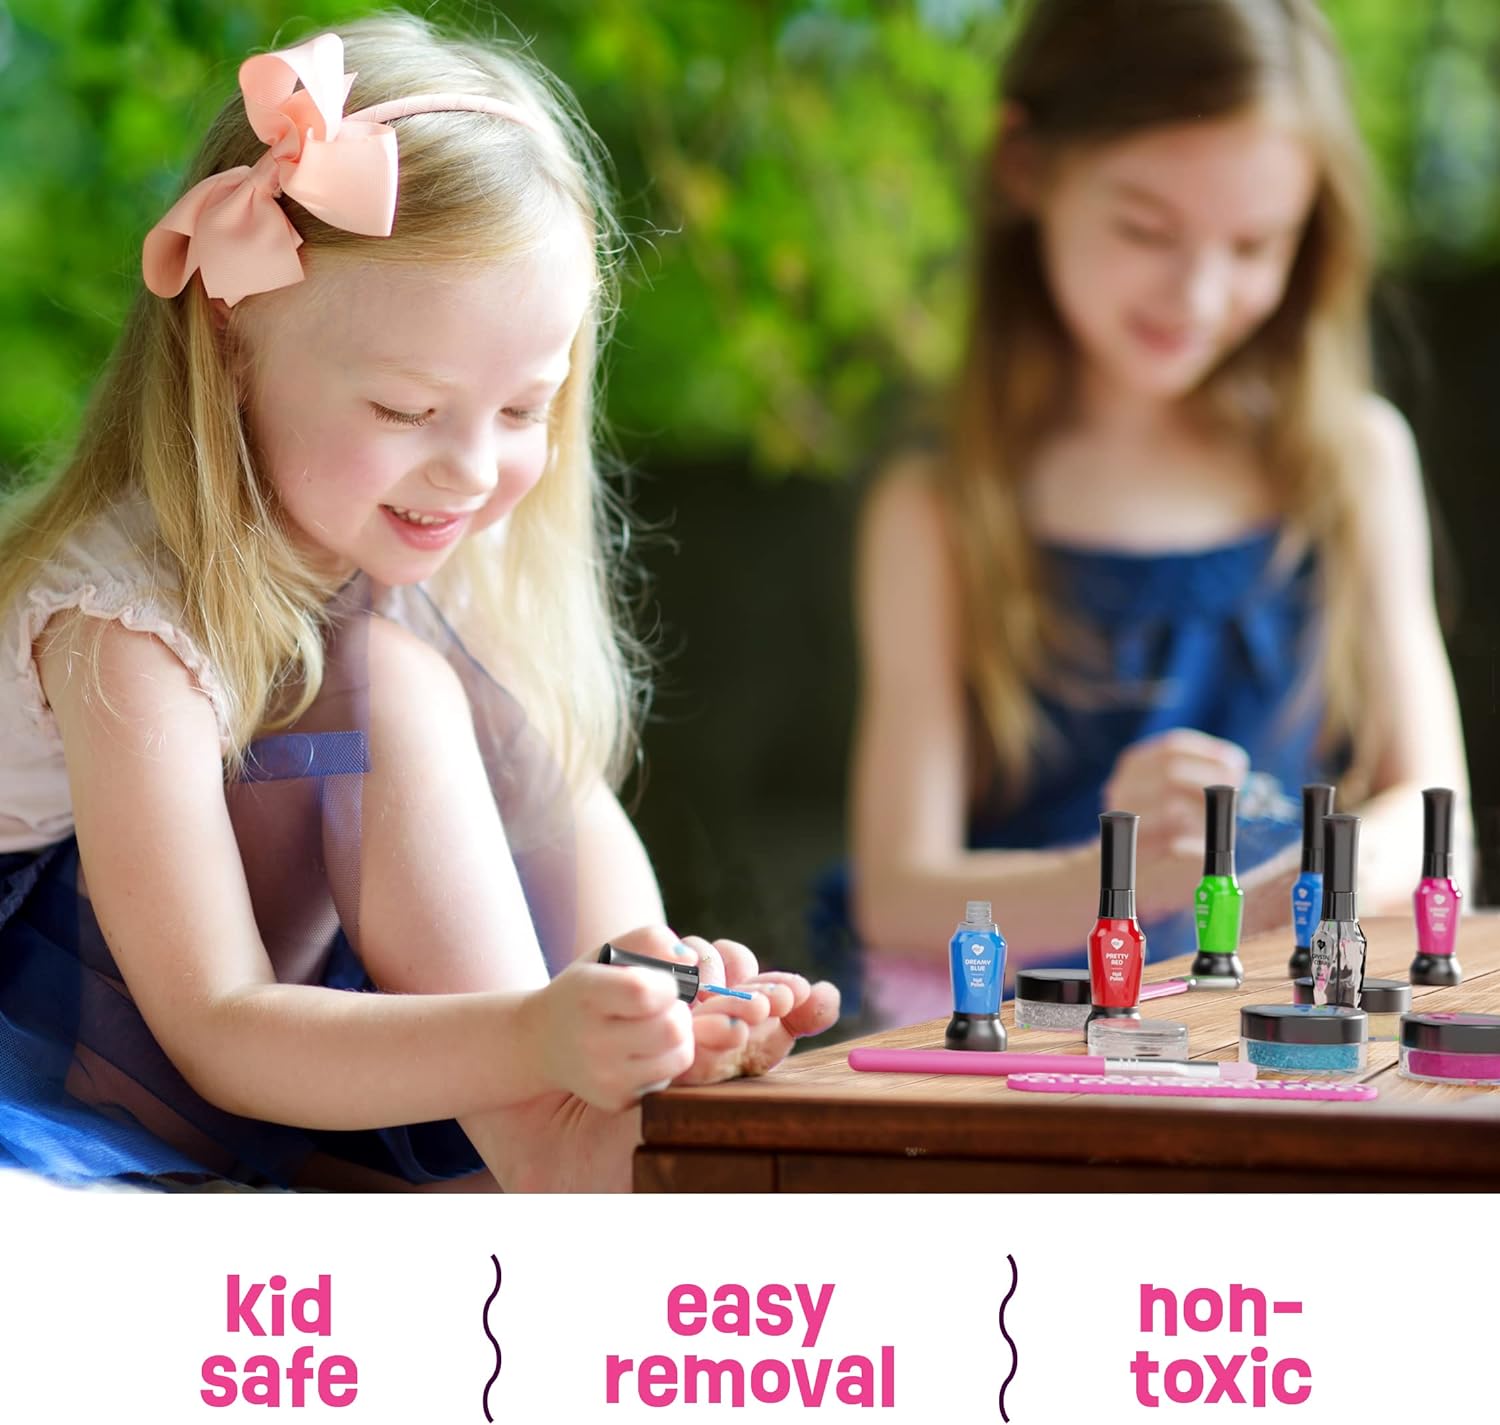 Nail Art Studio for Girls - Nail Polish Kit for Kids Ages 7-12 Years Old - Girl Gifts Ideas - Girls Nails Gift Set - Cool Girly Stuff - Polish, Pens, Glitter, Stickers, Gems, Filer - 8 9 10 11 12 Year